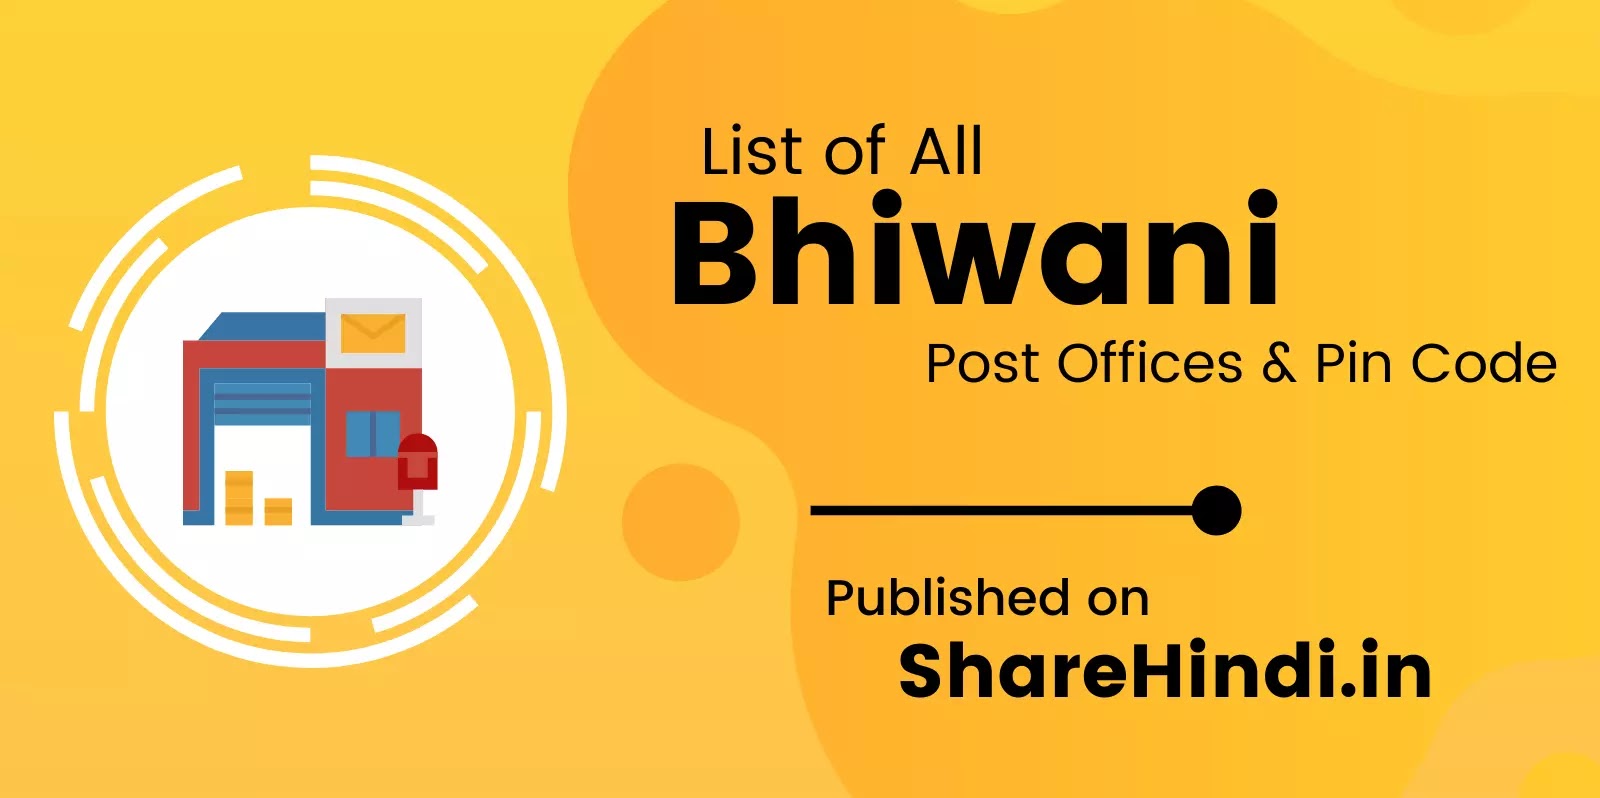 List of all Bhiwani post offices and Pin Codes